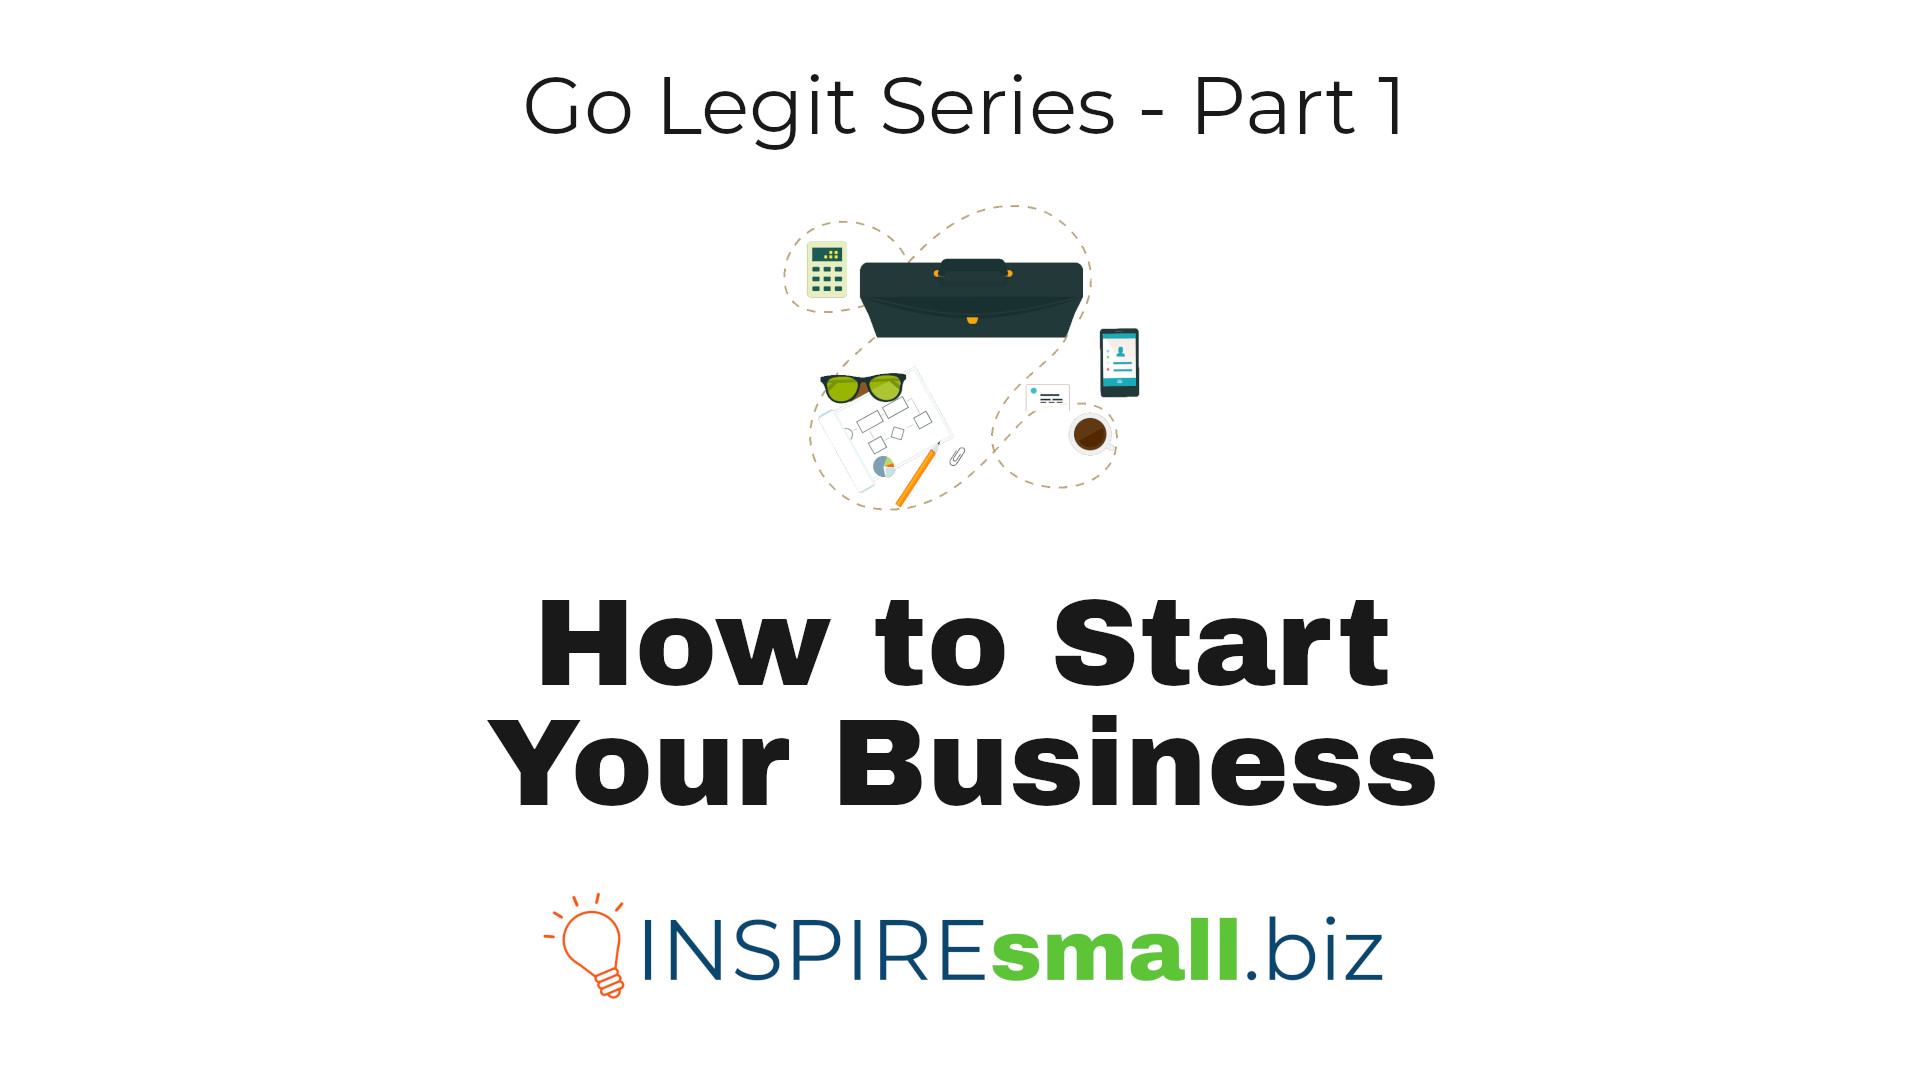 Image of a calculator, breifcase, smartphone, coffee and glasses on a table with the words 'How to Start Your Business and the INSPIREsmall.biz logo